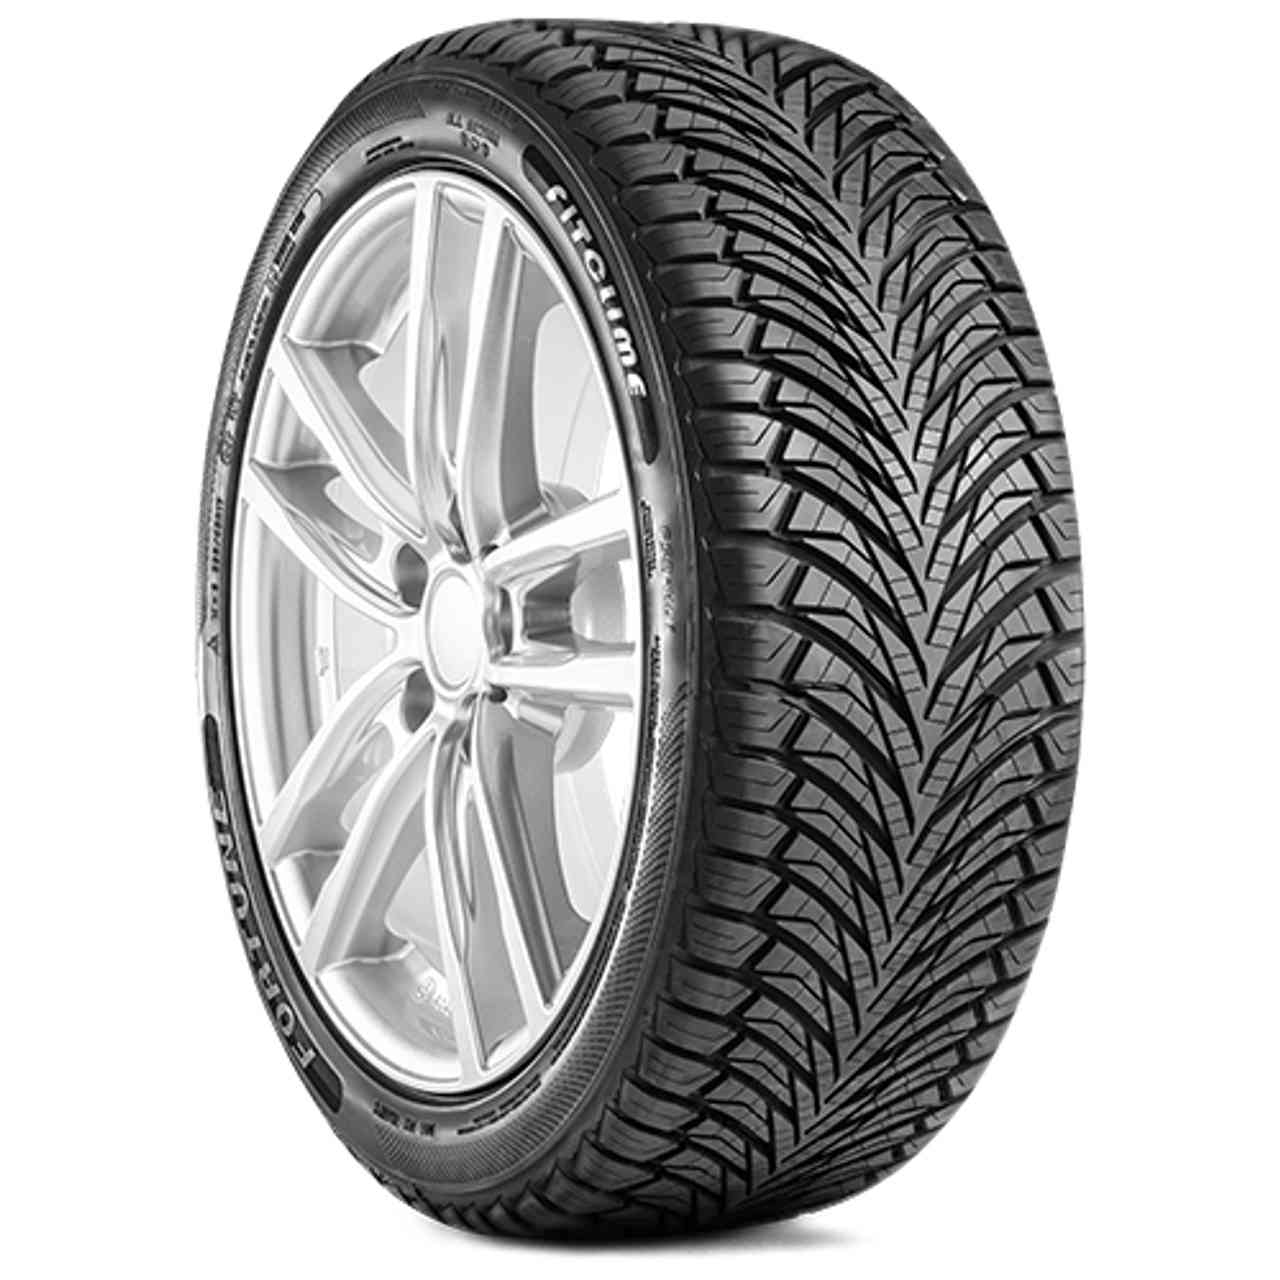 FORTUNE FITCLIME FSR-401 195/55R16 91V BSW XL